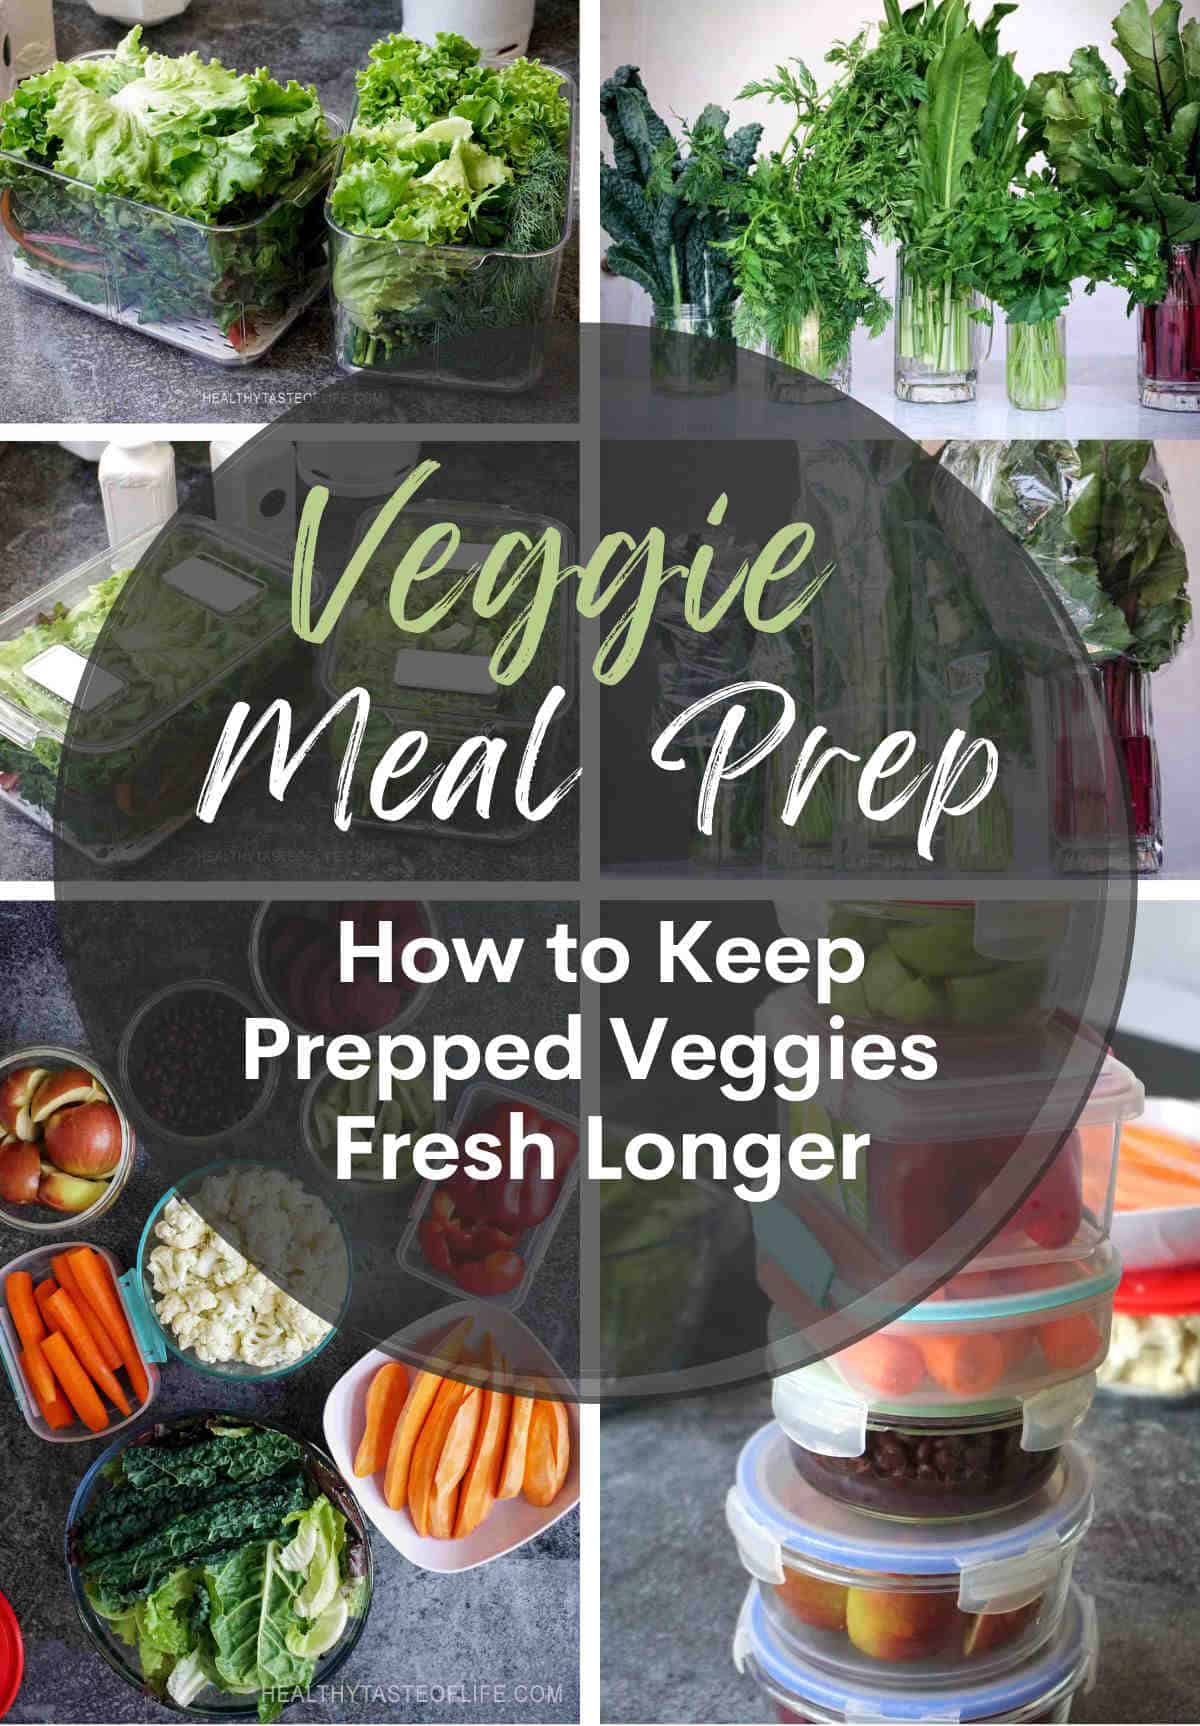 Learn to meal prep vegetables whether you store them whole, chopped, fresh or cooked, there are a few tips that can help you keep your veggies fresh longer. These are great veggie prep tips for the week (for beginners) when trying to eat more whole fresh foods and adopt a clean eating diet. Save time and money with these veggie meal prep tips. #mealprep #veggieprep